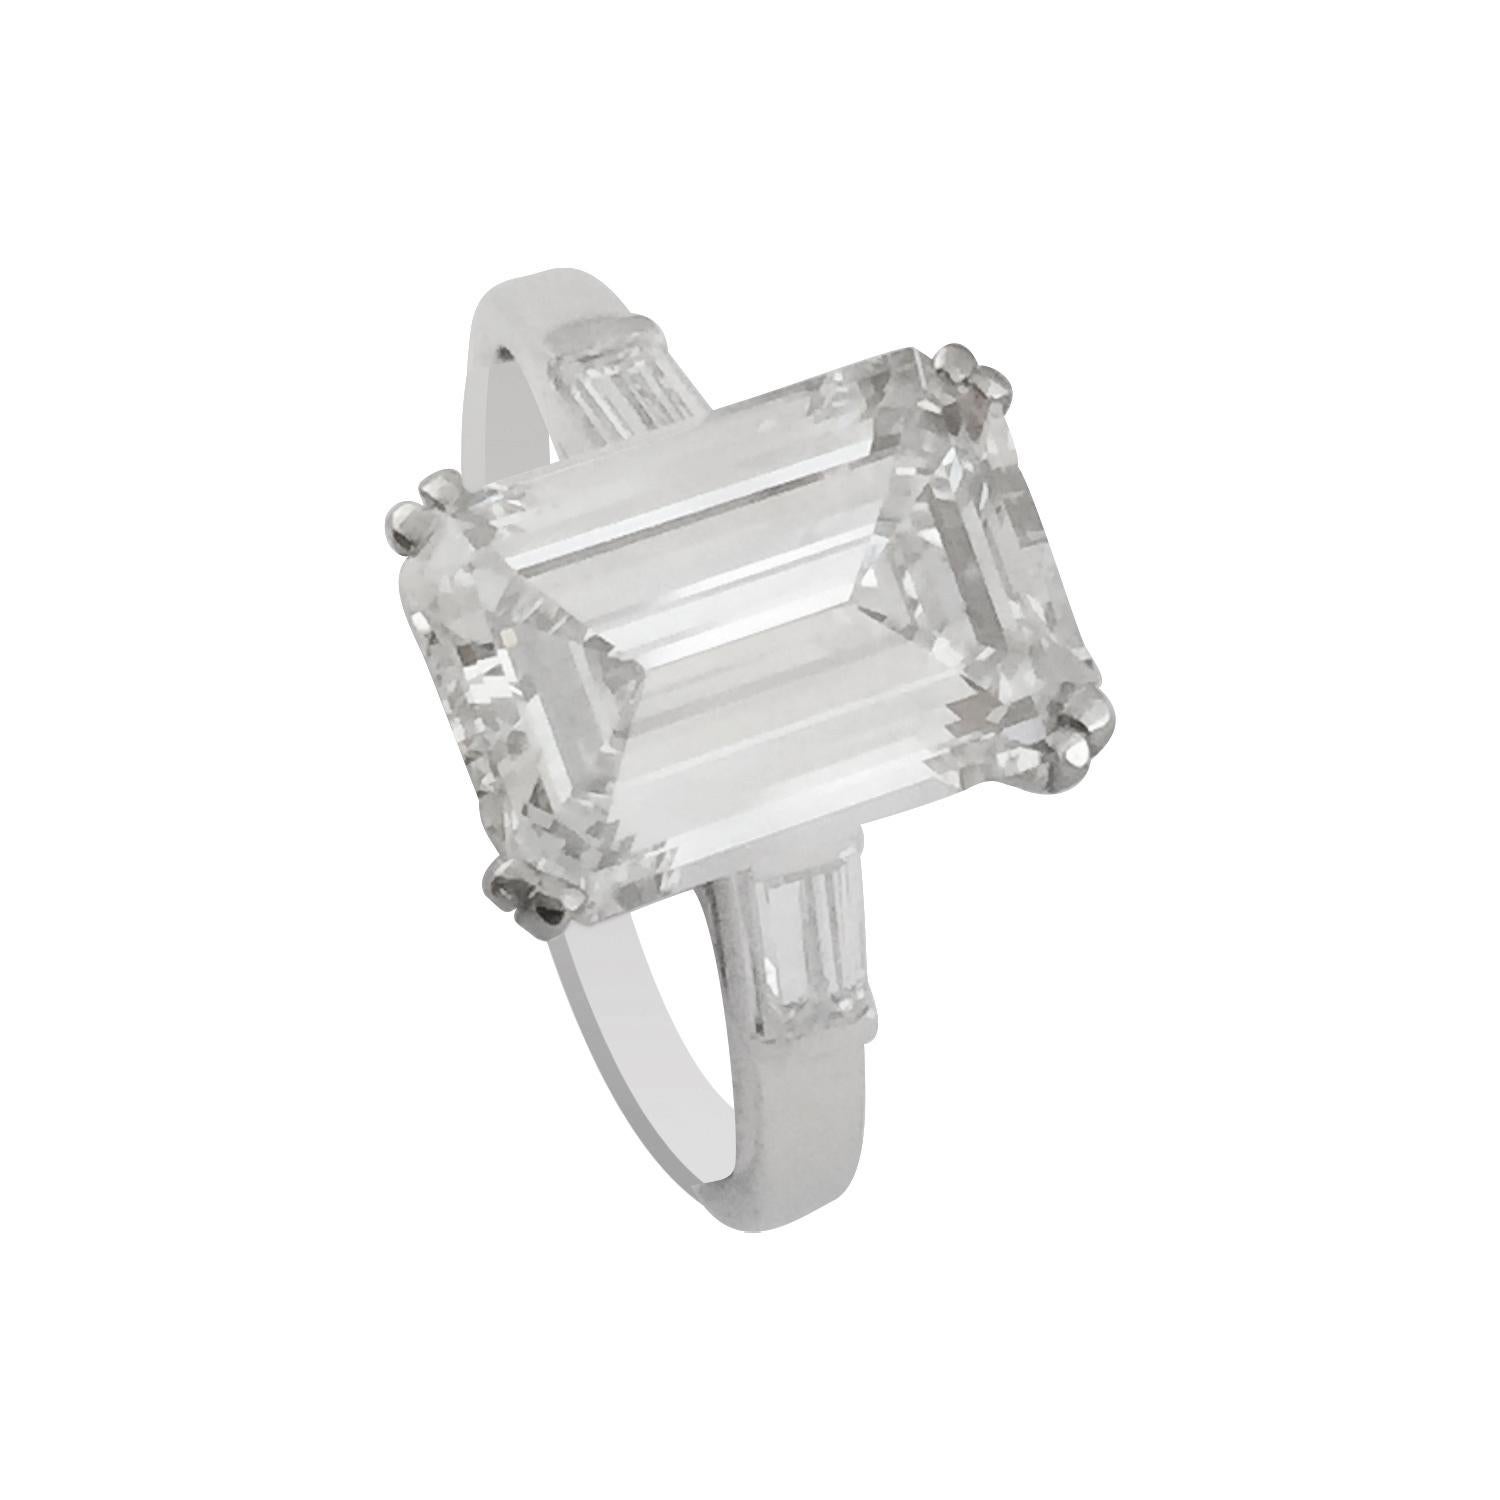 750/000 (18kt) White gold and platinum ring set with a 3.82 carat emerald-cut diamond.
The stone is laid in a 4 double prongs basket setting.
On the mounting, the center diamond is flanked by two diamond baguettes weighing about 0.50 carat.  
Weight